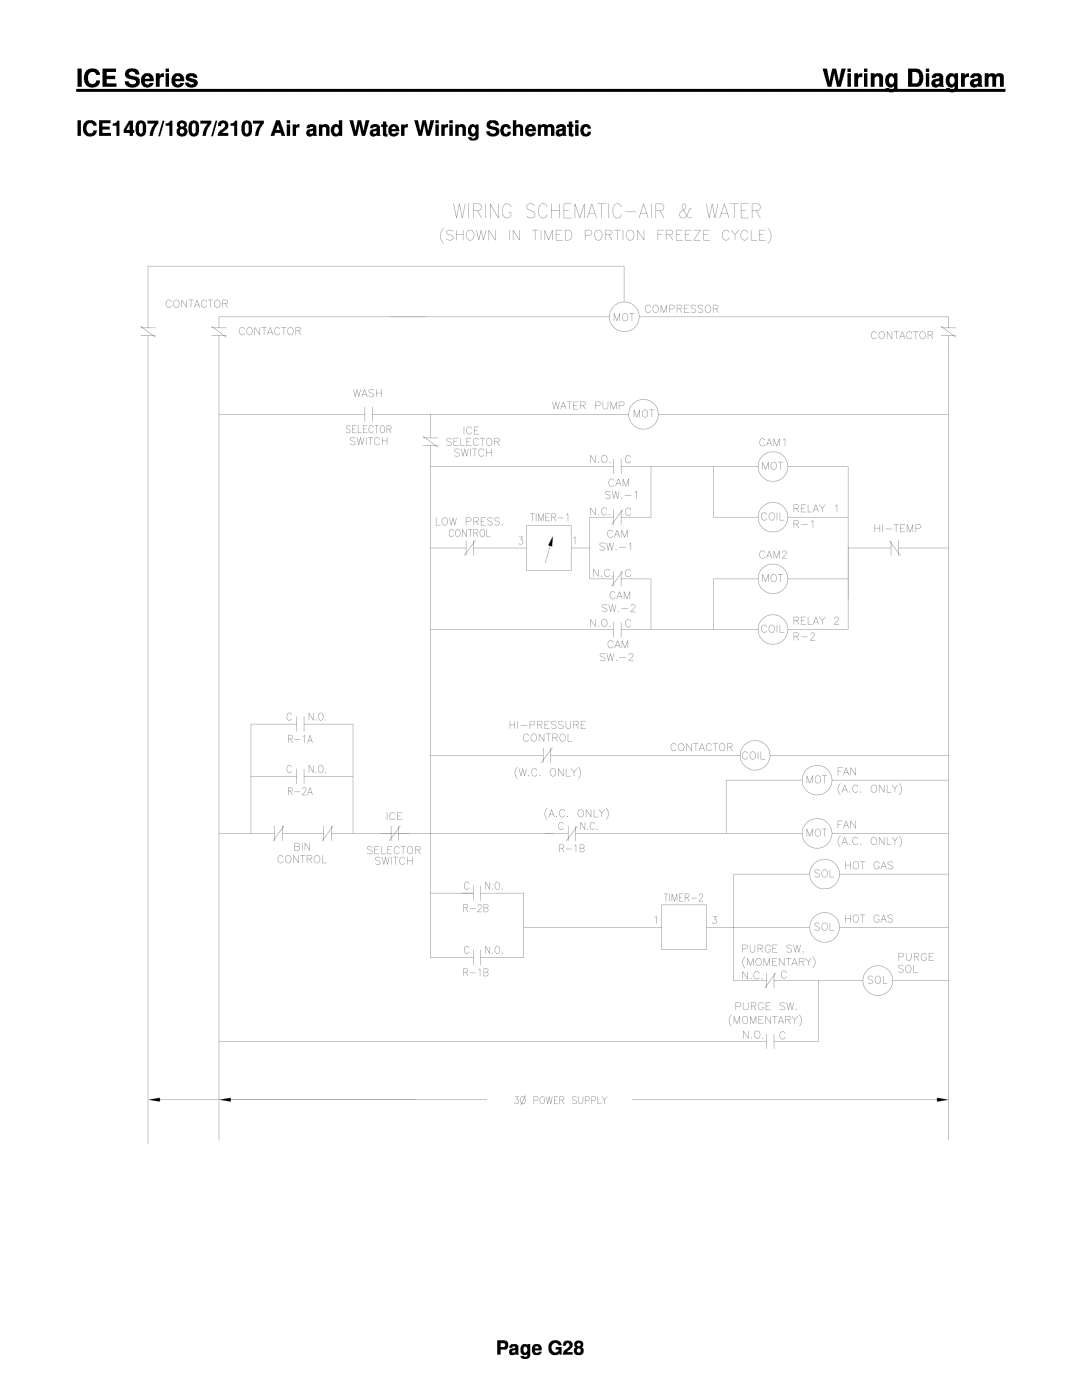 Ice-O-Matic ICE0250 Series ICE1407/1807/2107 Air and Water Wiring Schematic, ICE Series, Wiring Diagram, Page G28 